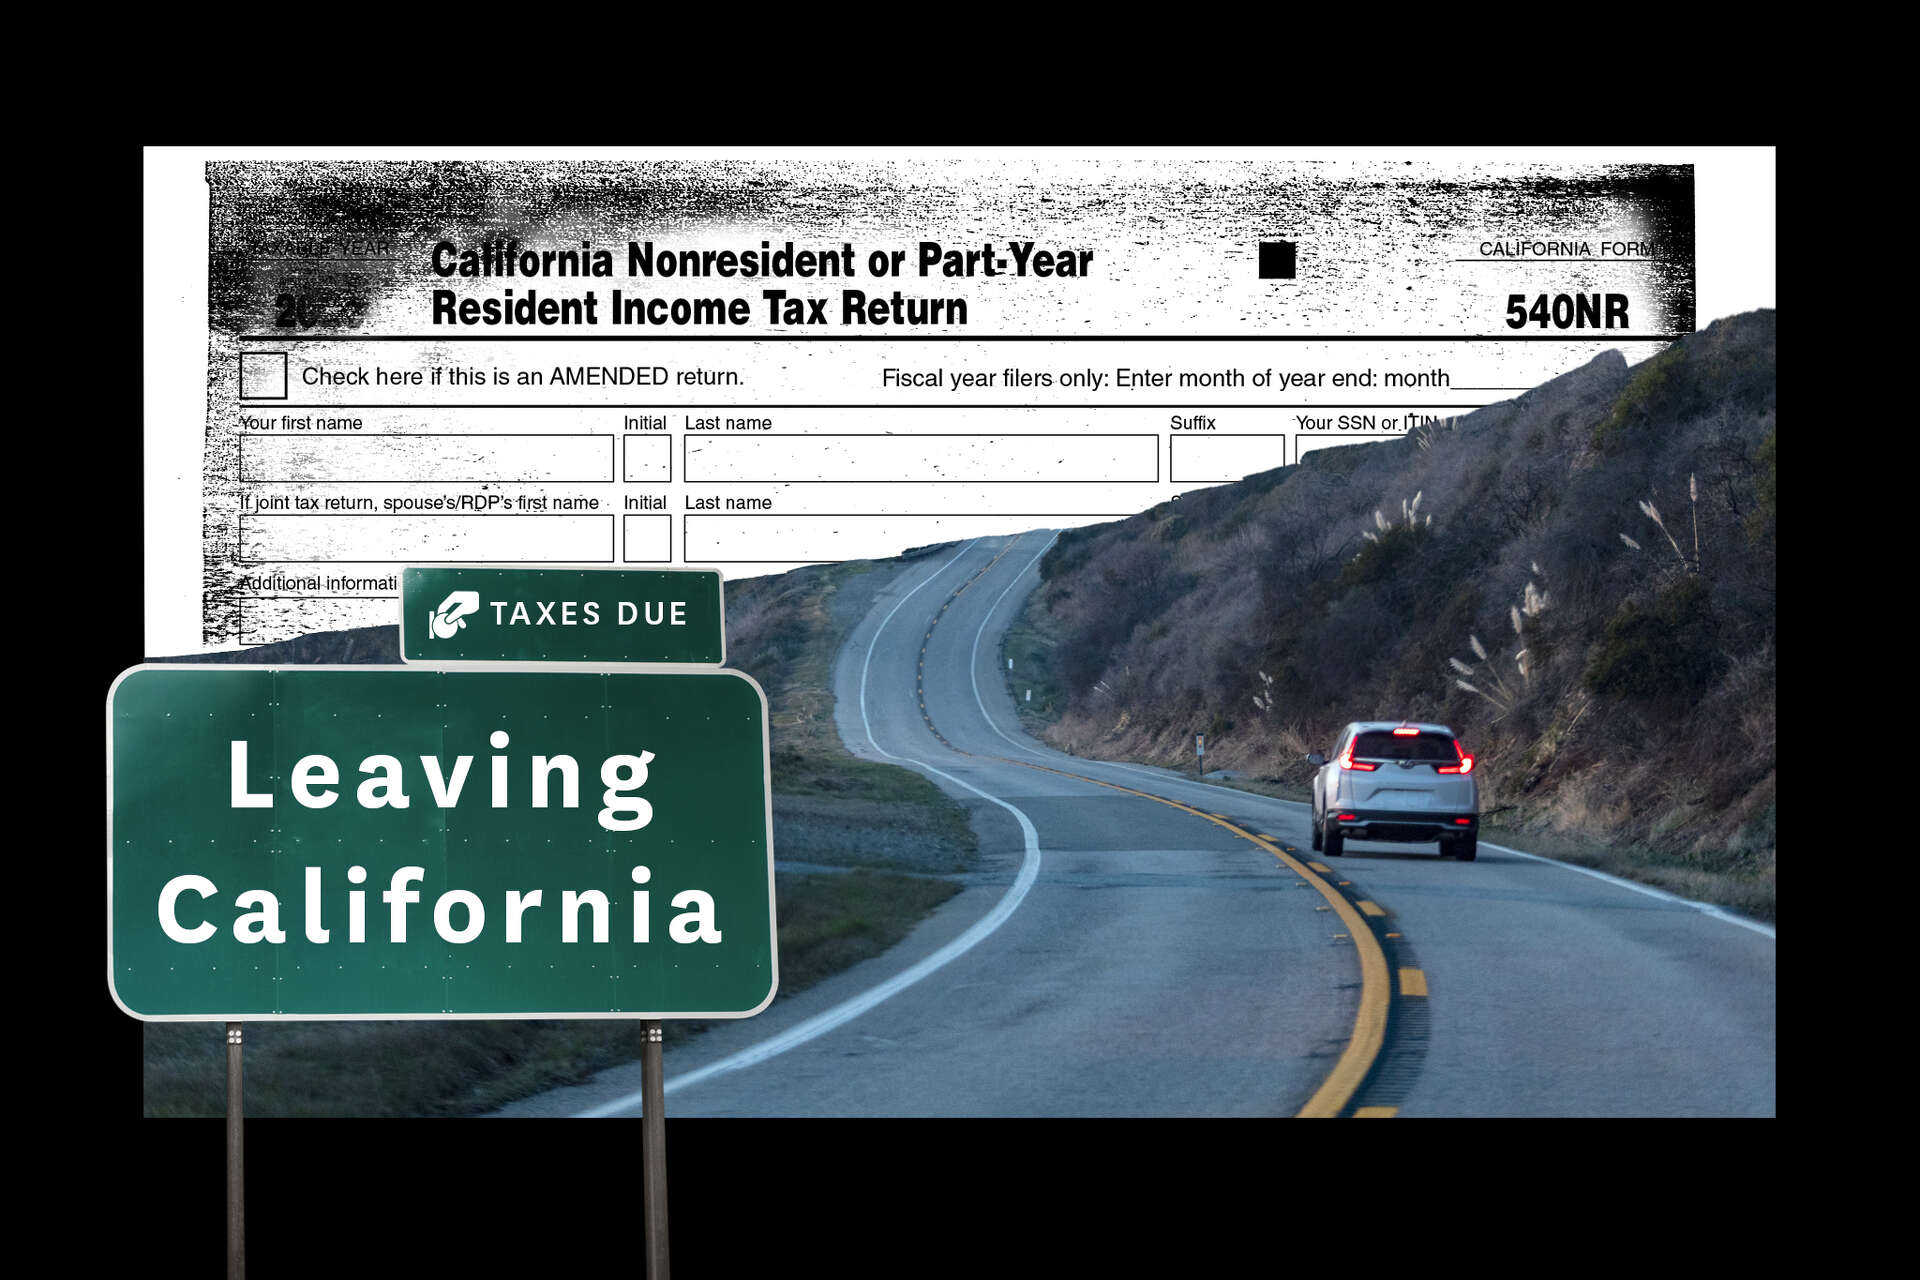 California doesn’t have an ‘exit tax’ — but can tax some who move away